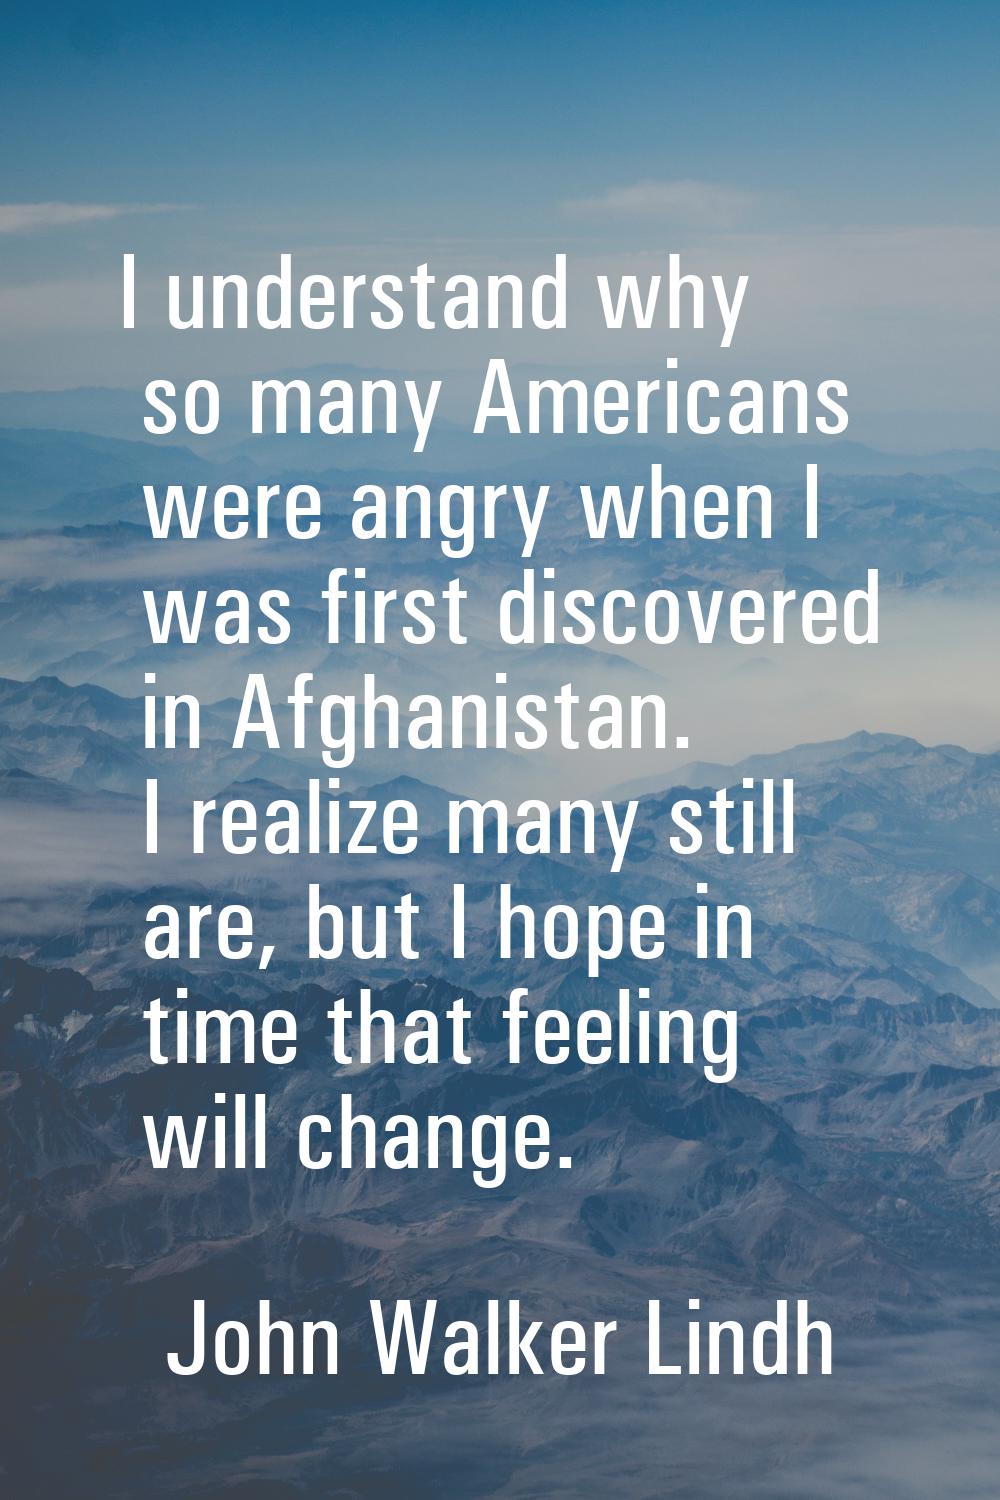 I understand why so many Americans were angry when I was first discovered in Afghanistan. I realize